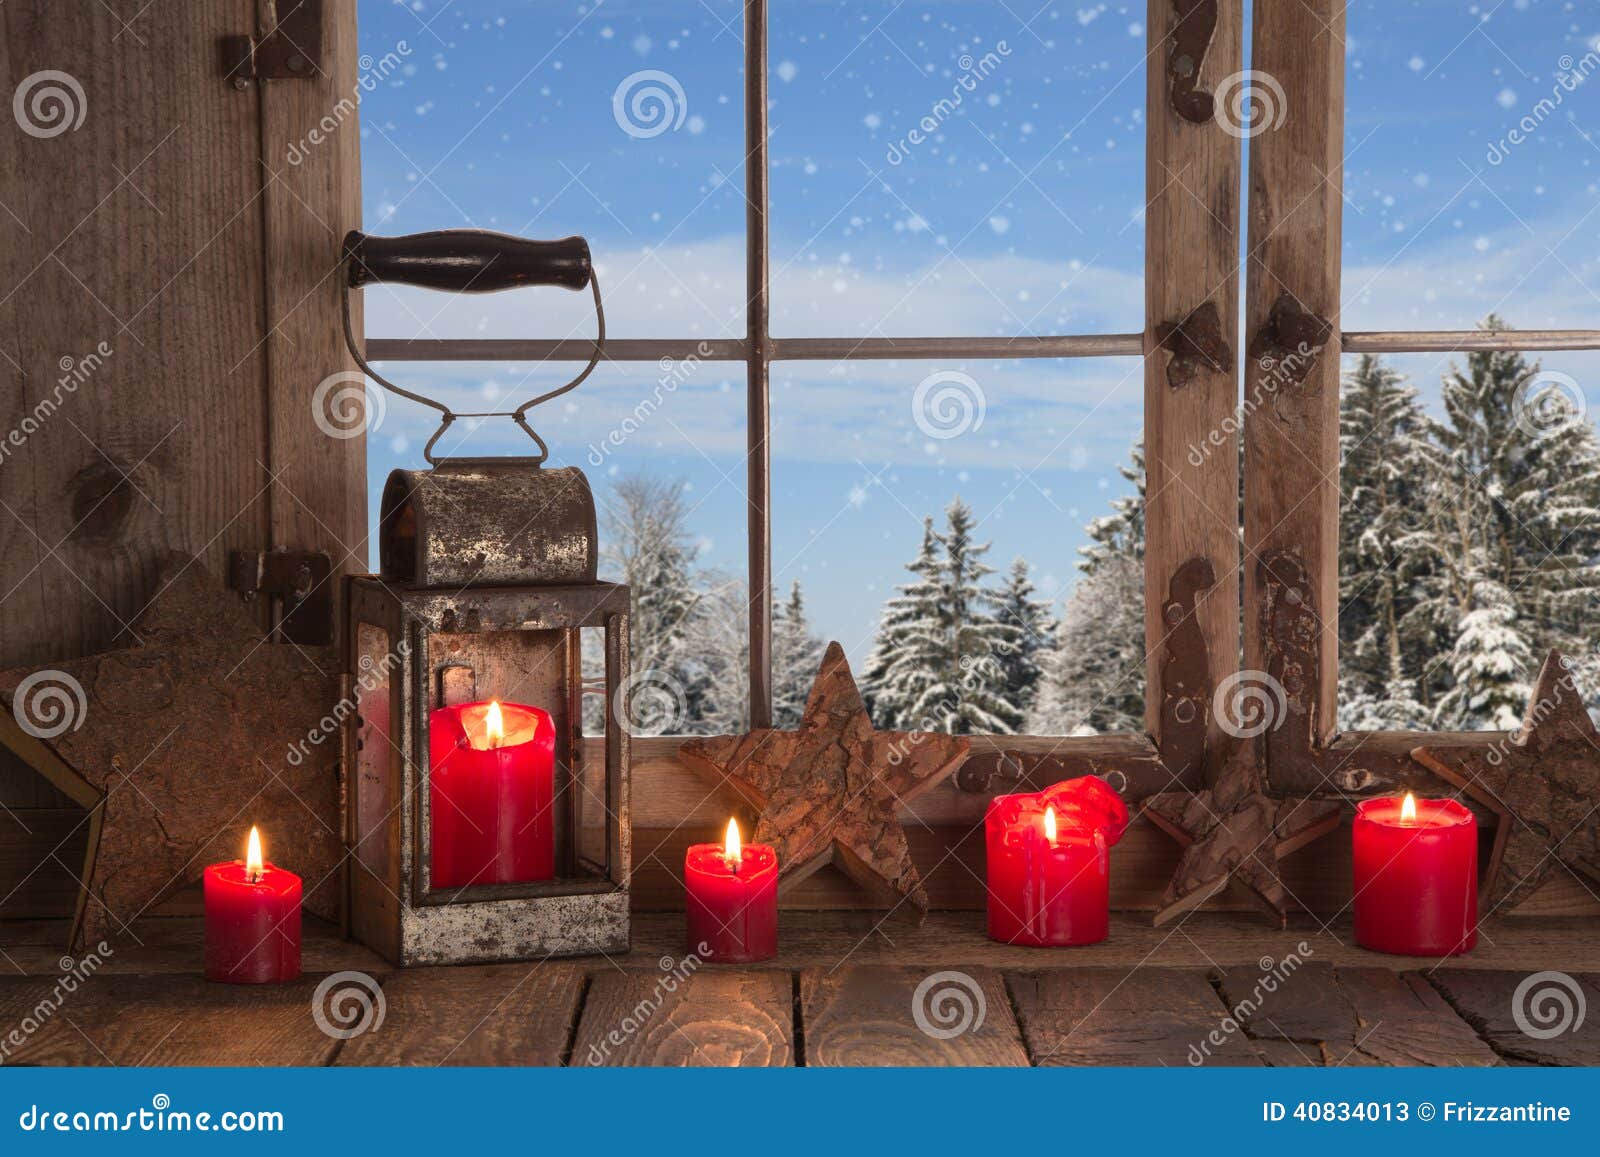 Country Christmas Decoration: Wooden Window Decorated with Red C Stock ...